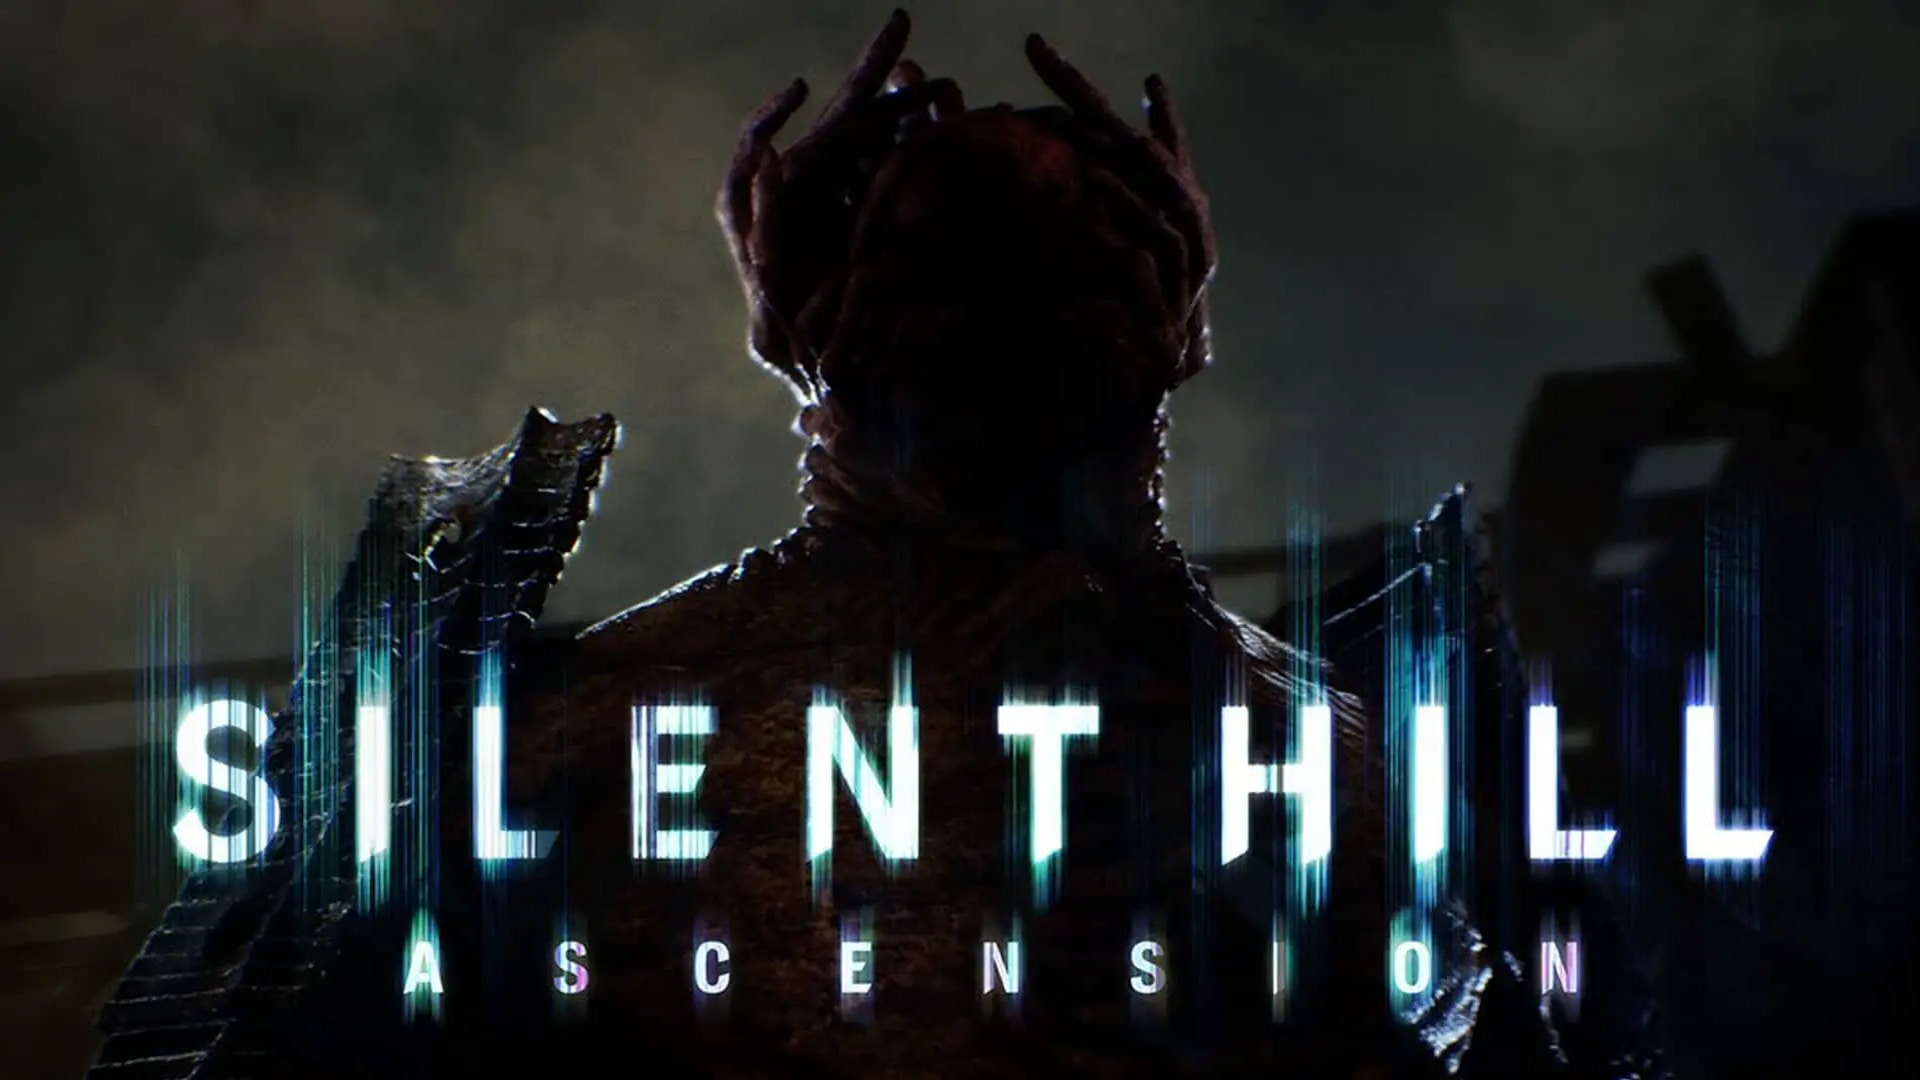 Silent Hill: Ascension gets a cinematic story trailer